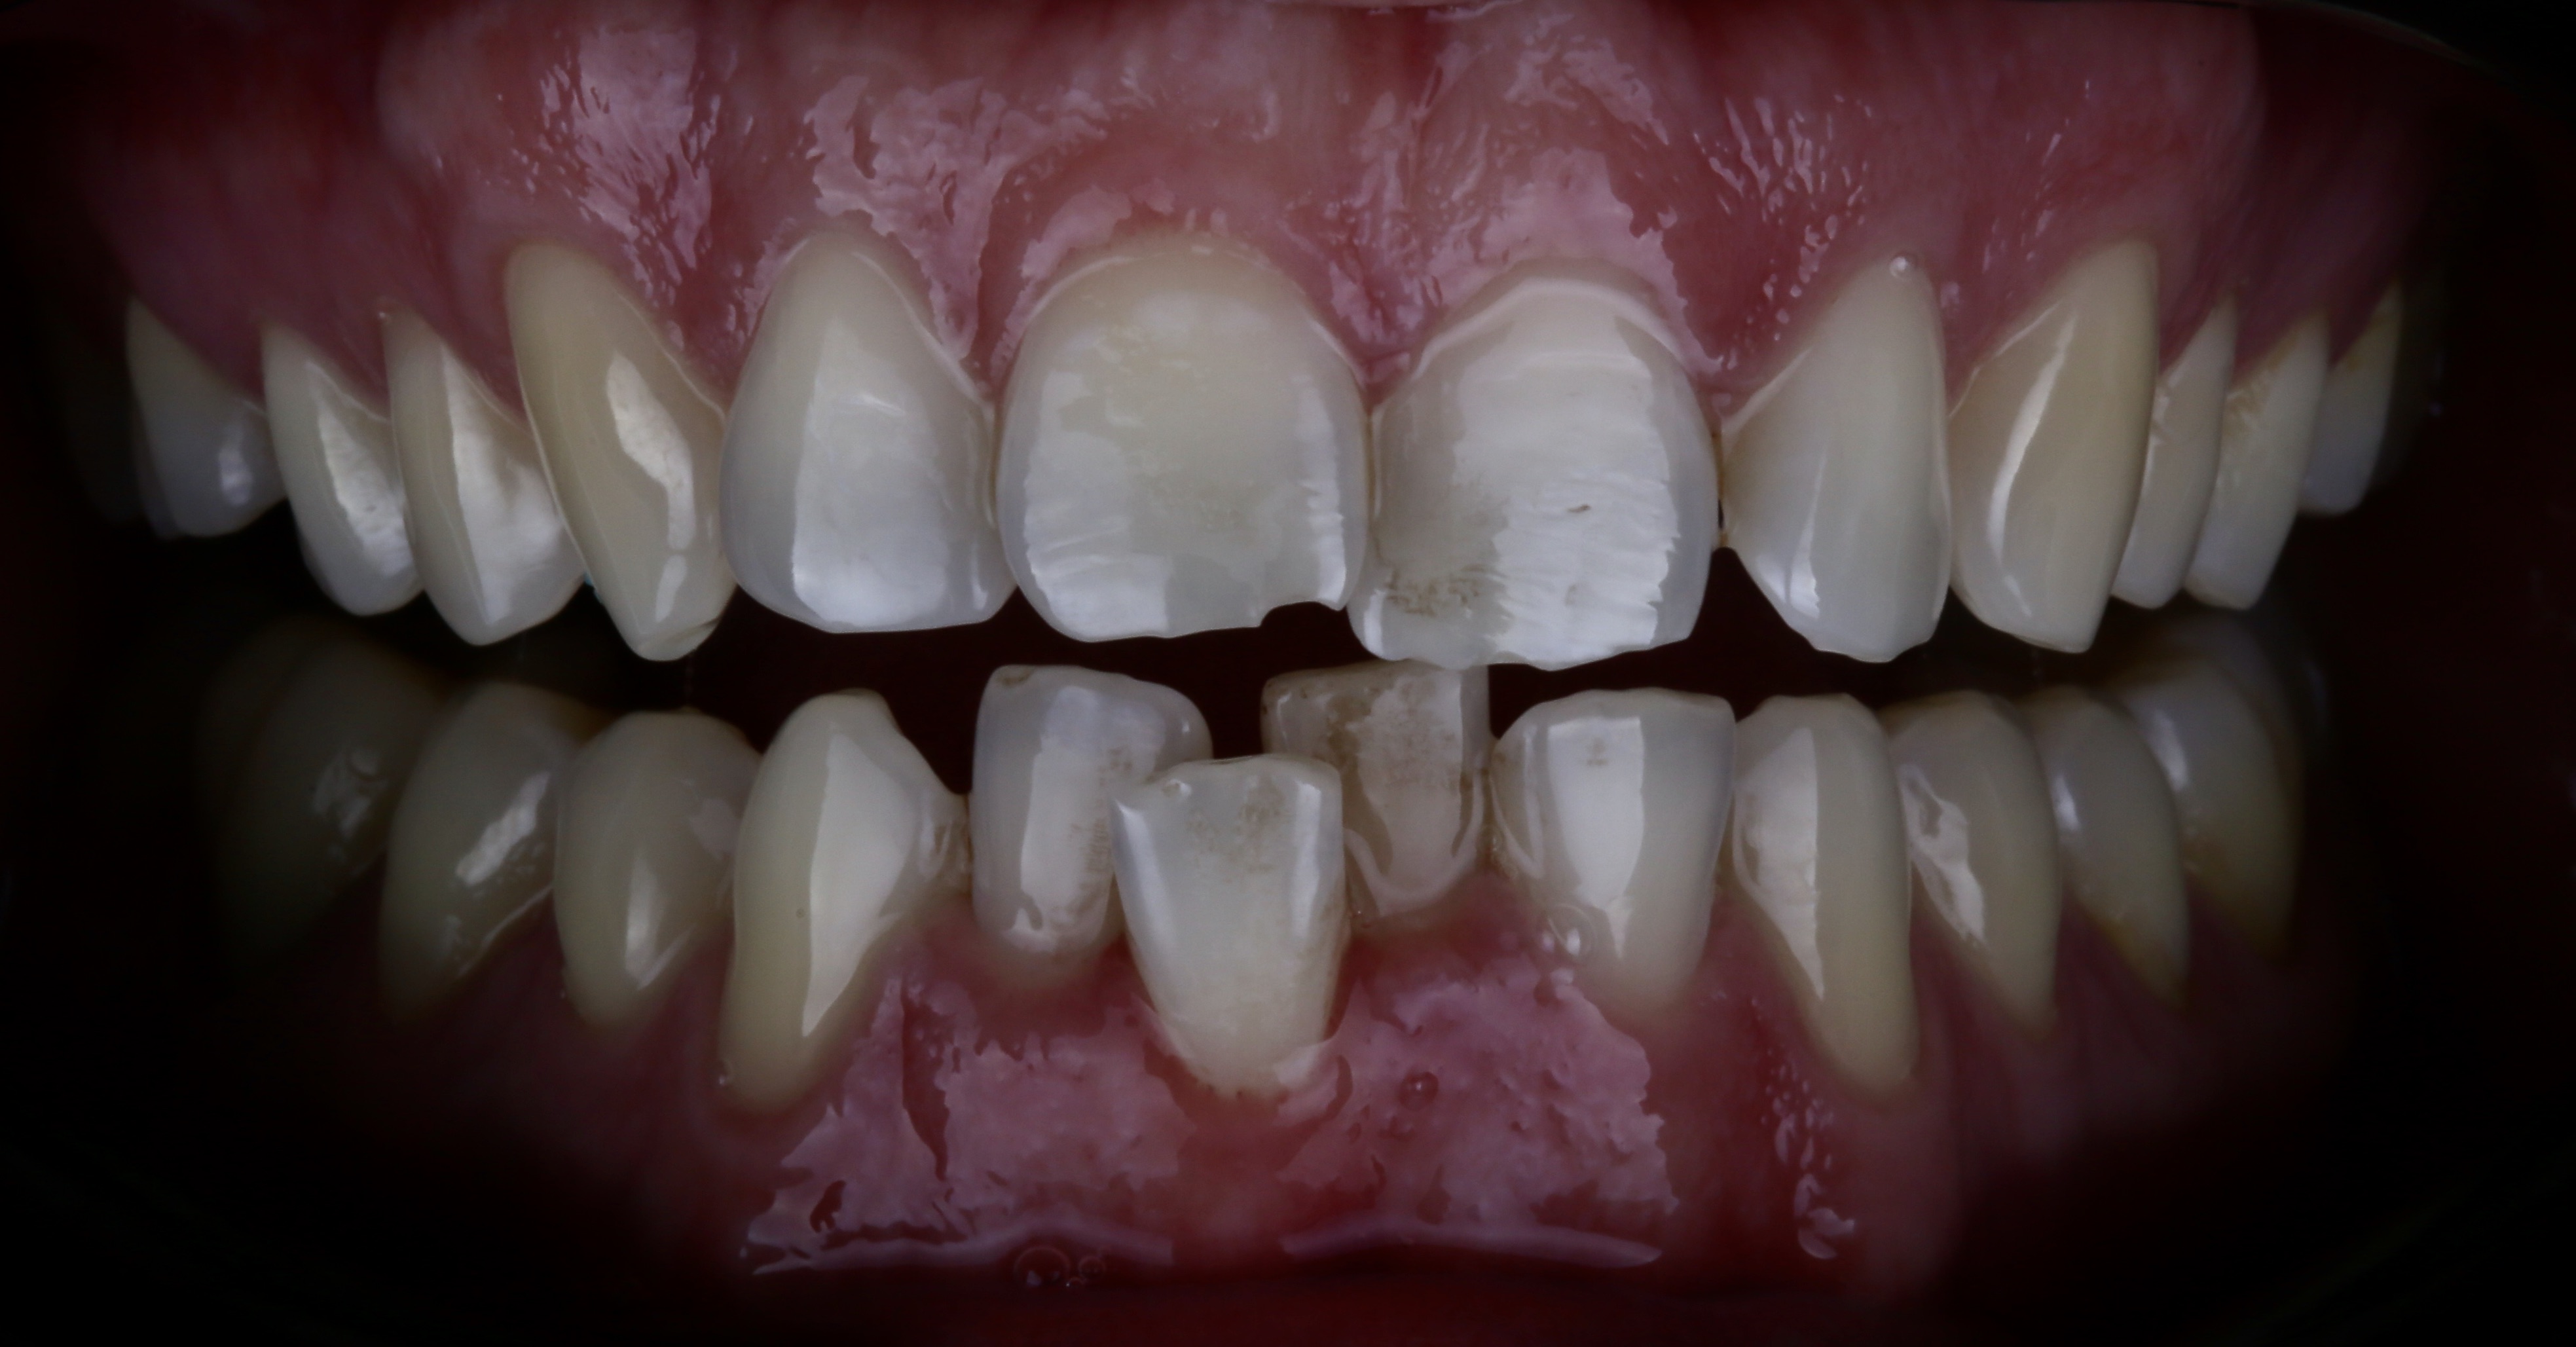 Crowded and overlapped front teeth